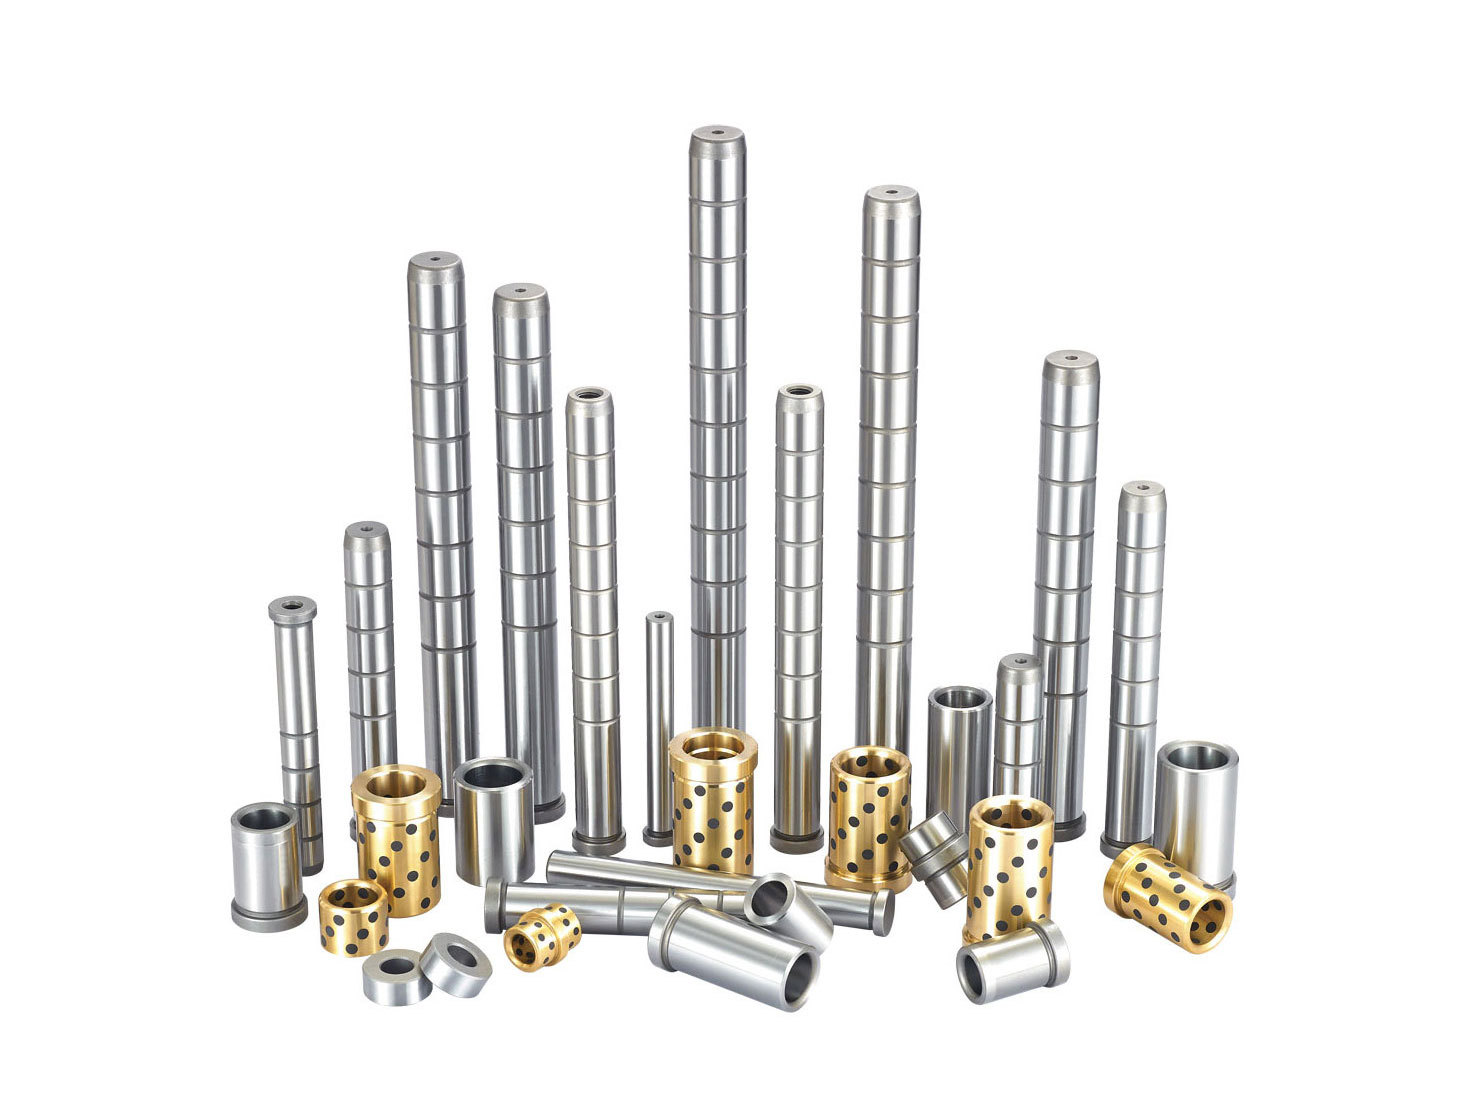 Wholesale sliding guide post manufacturers introduction: What are the reasons for the breakage of the guide post?